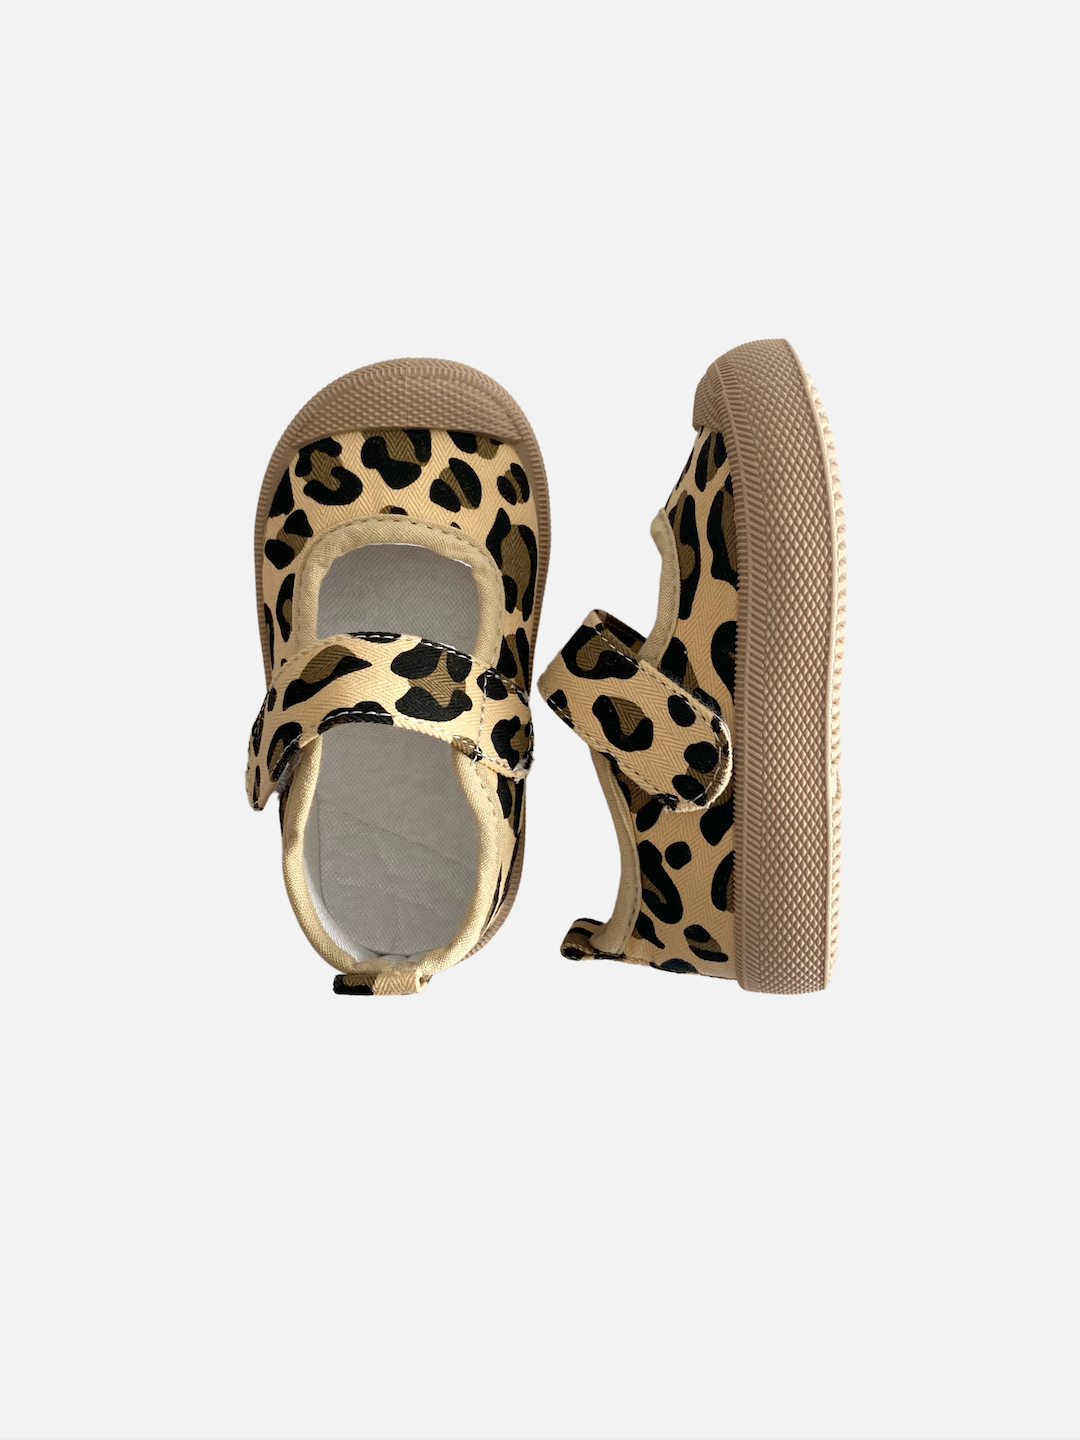 A pair of toddler mary jane sneakers in a leopard print, top and side view